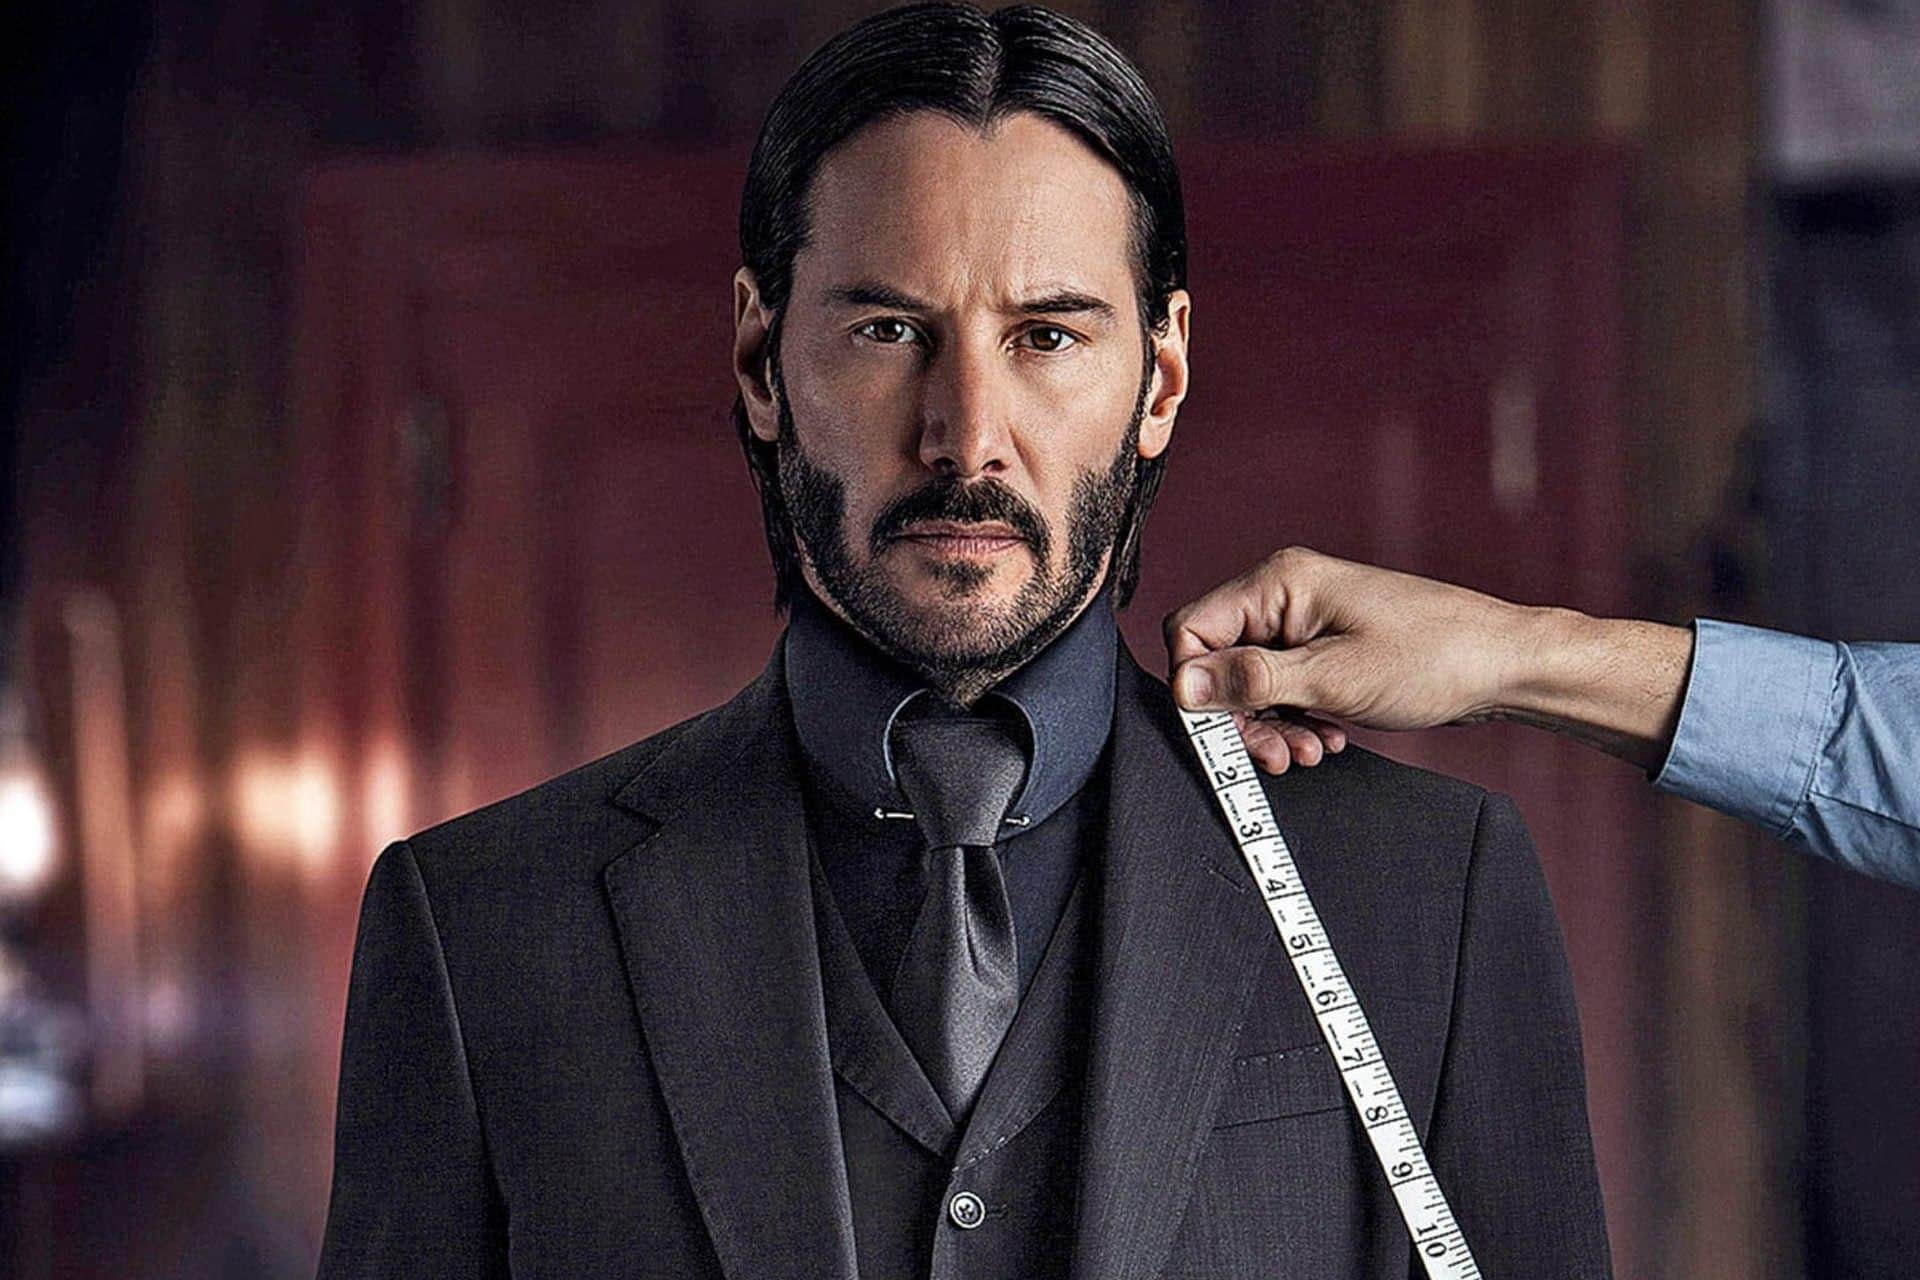 They are very different”: Equalizer 3 Director Reveals How Keanu Reeves'  John Wick is Different from Denzel Washington Despite Their Killer Instincts